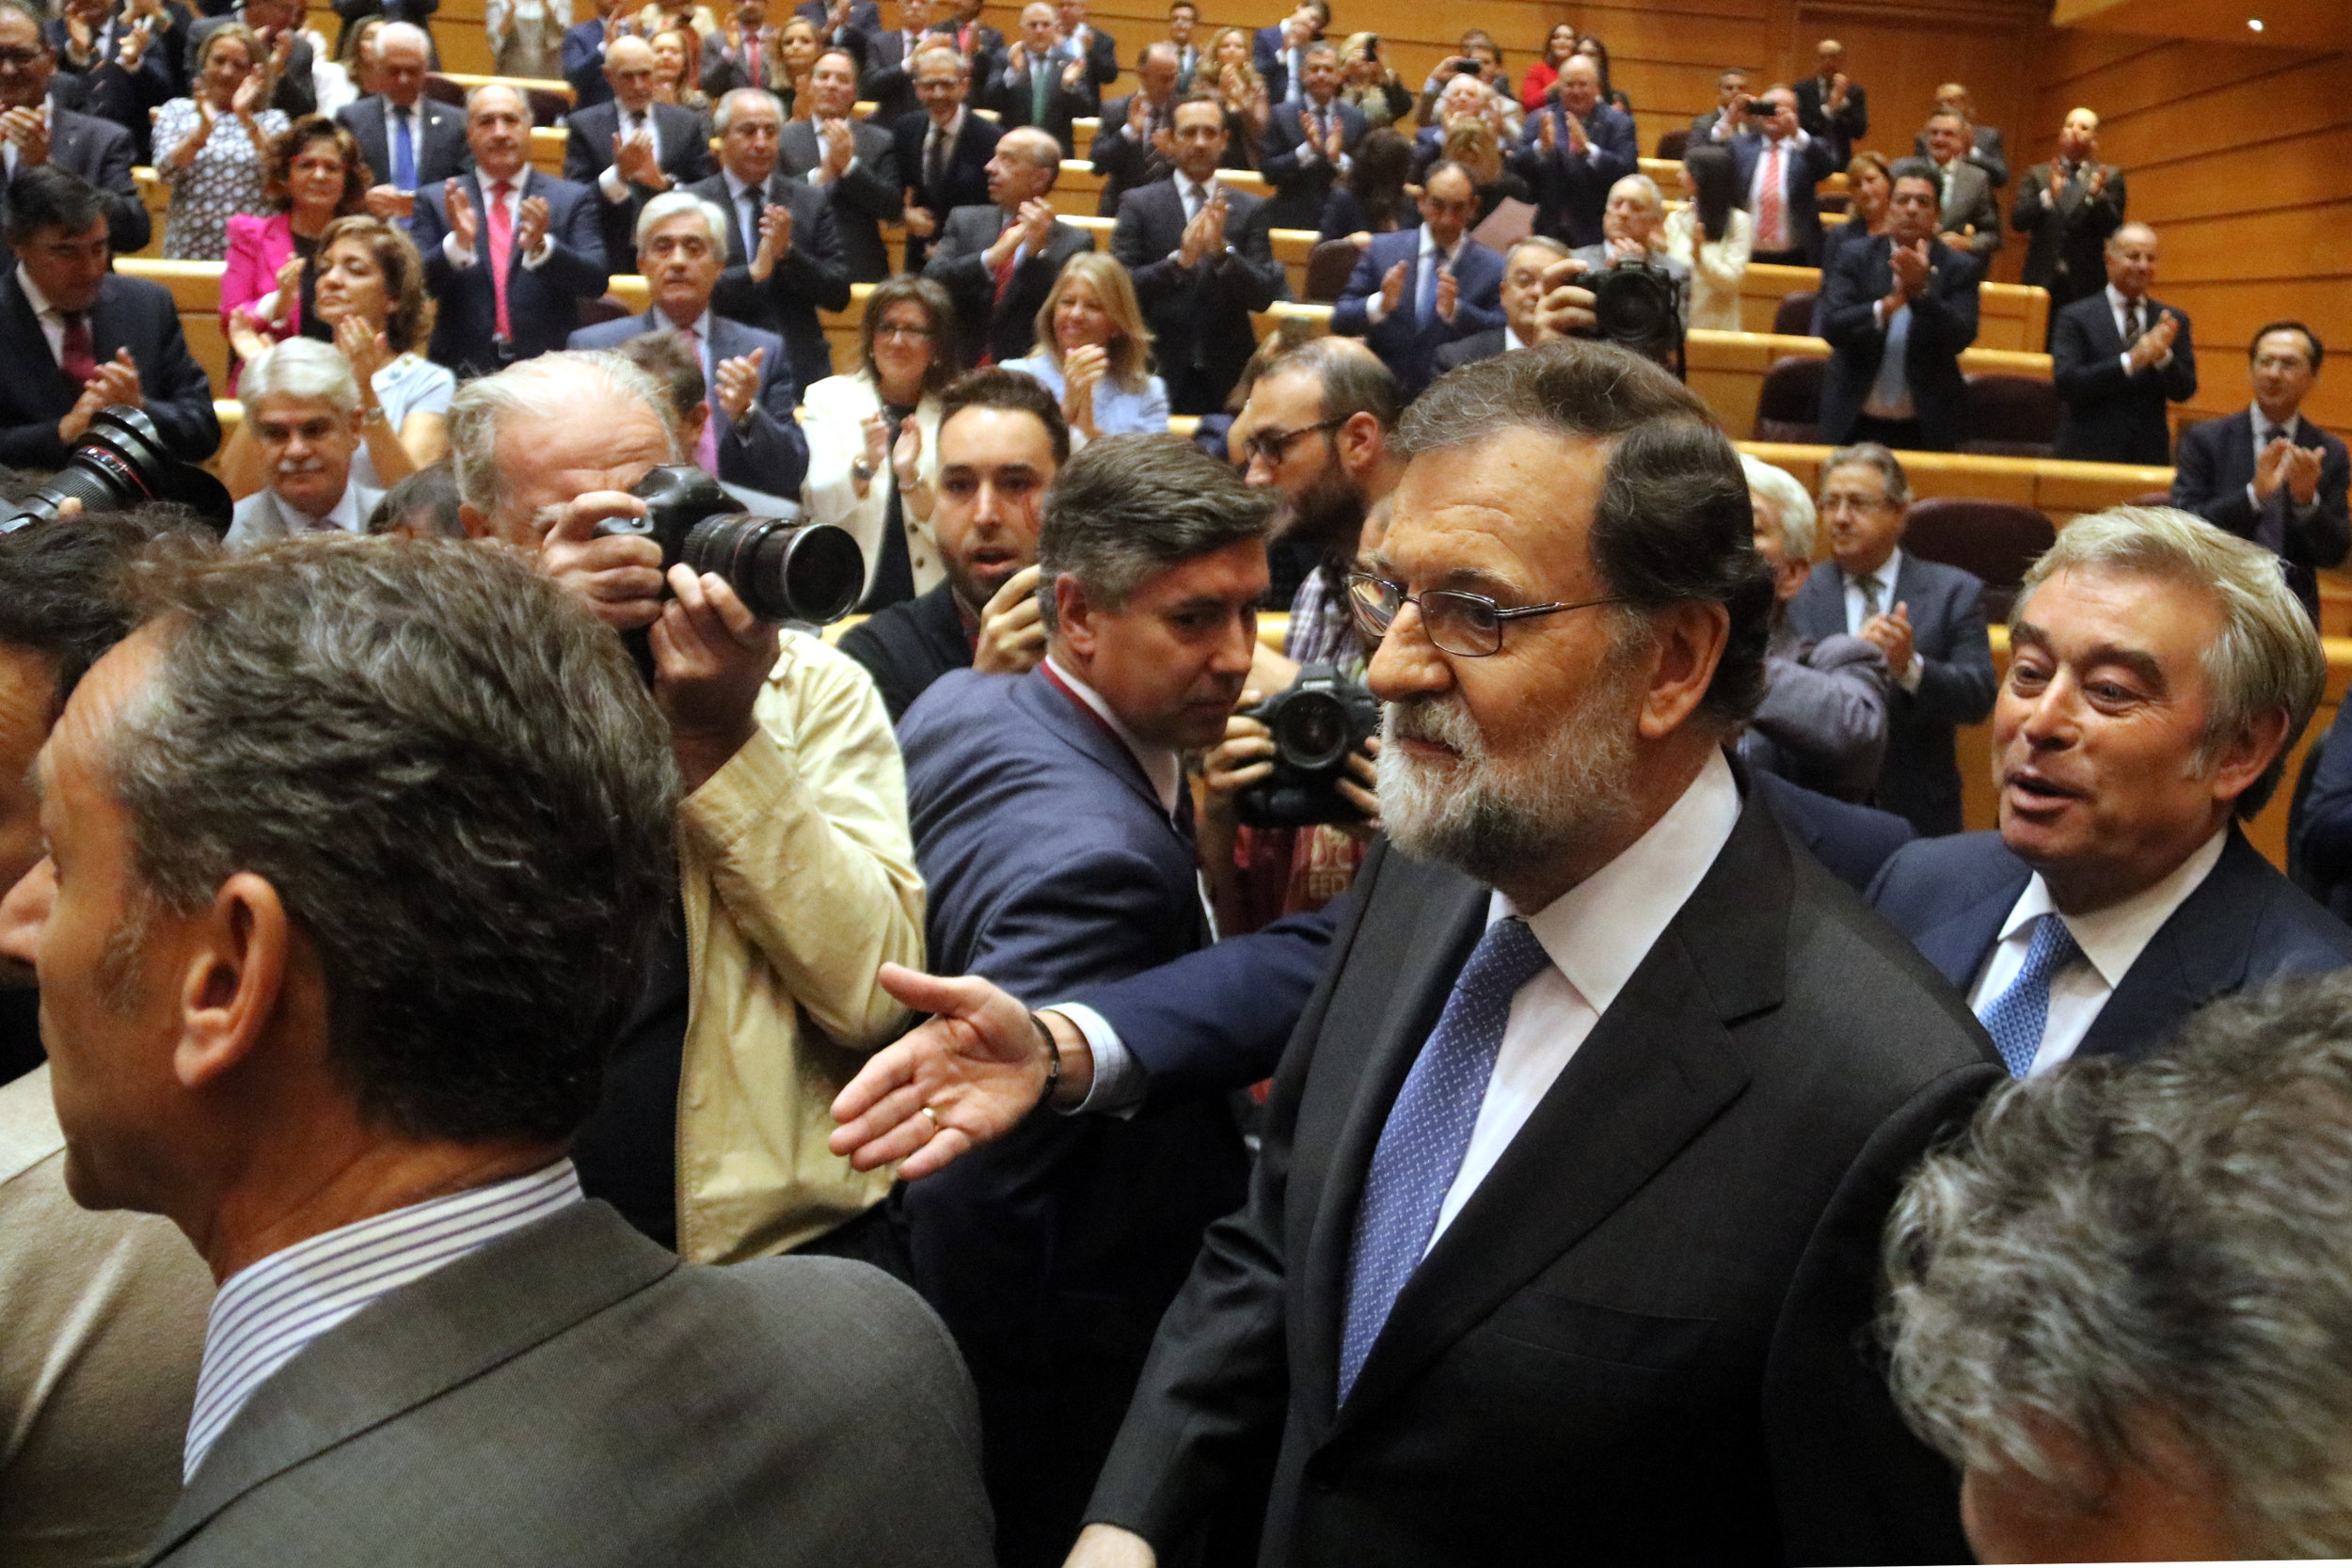 Spain's president Mariano Rajoy entering the Spanish Senate on October 27 to debate the future of Catalonia (by ACN)